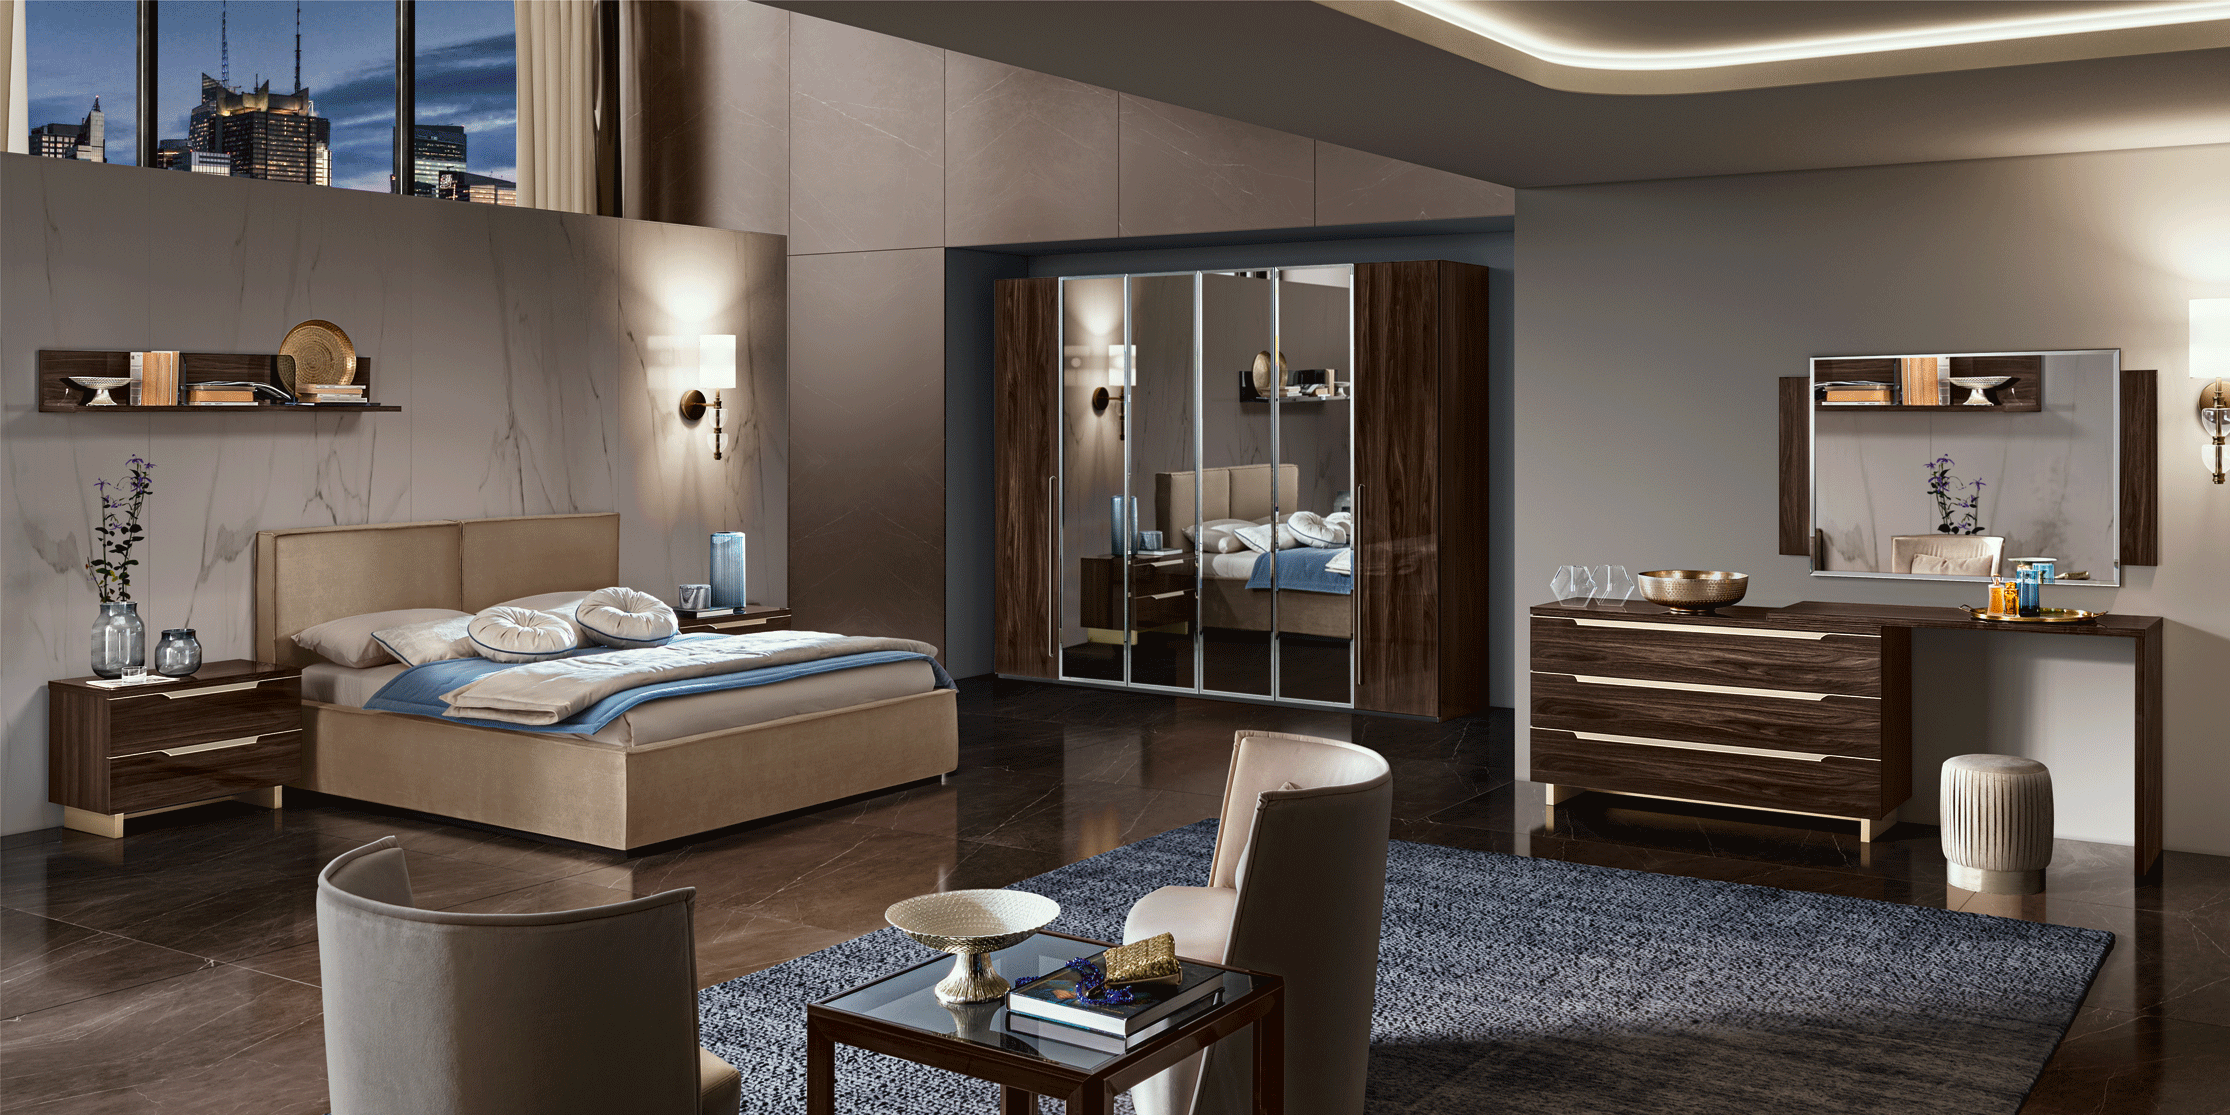 Bedroom Furniture Beds with storage Smart Bedgroup Walnut Additional items